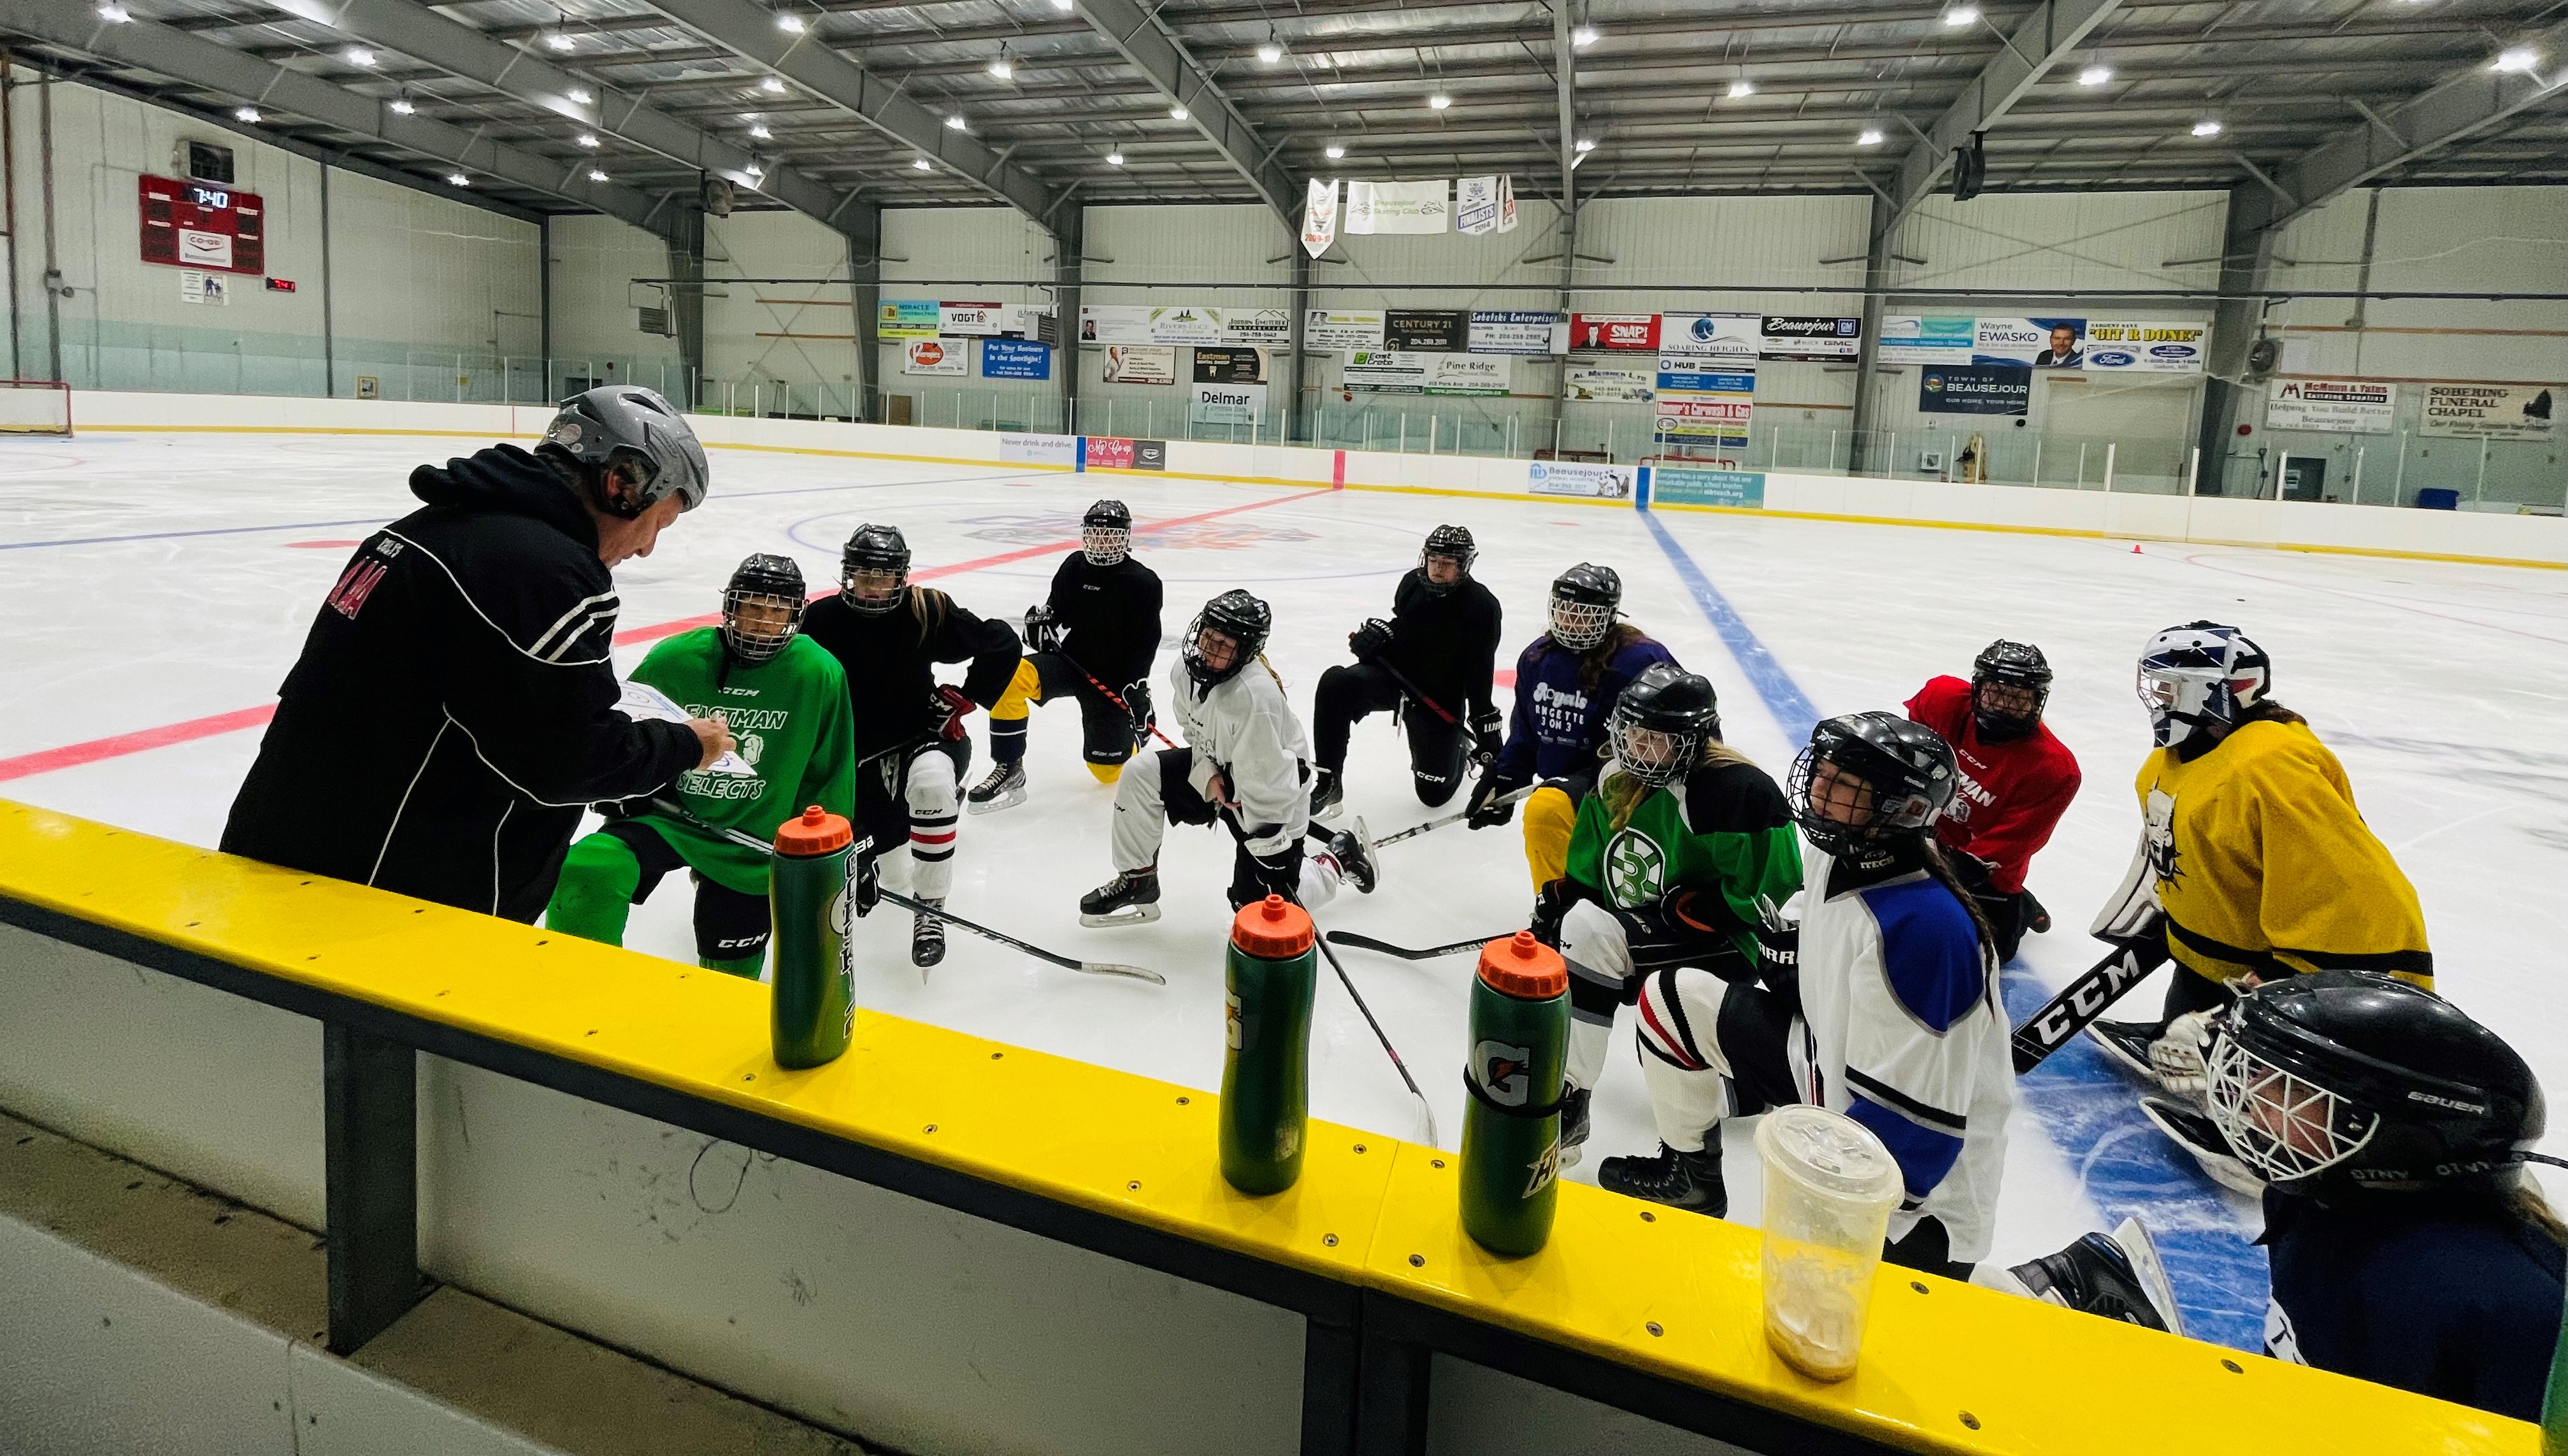 Beausejour Barons first practice